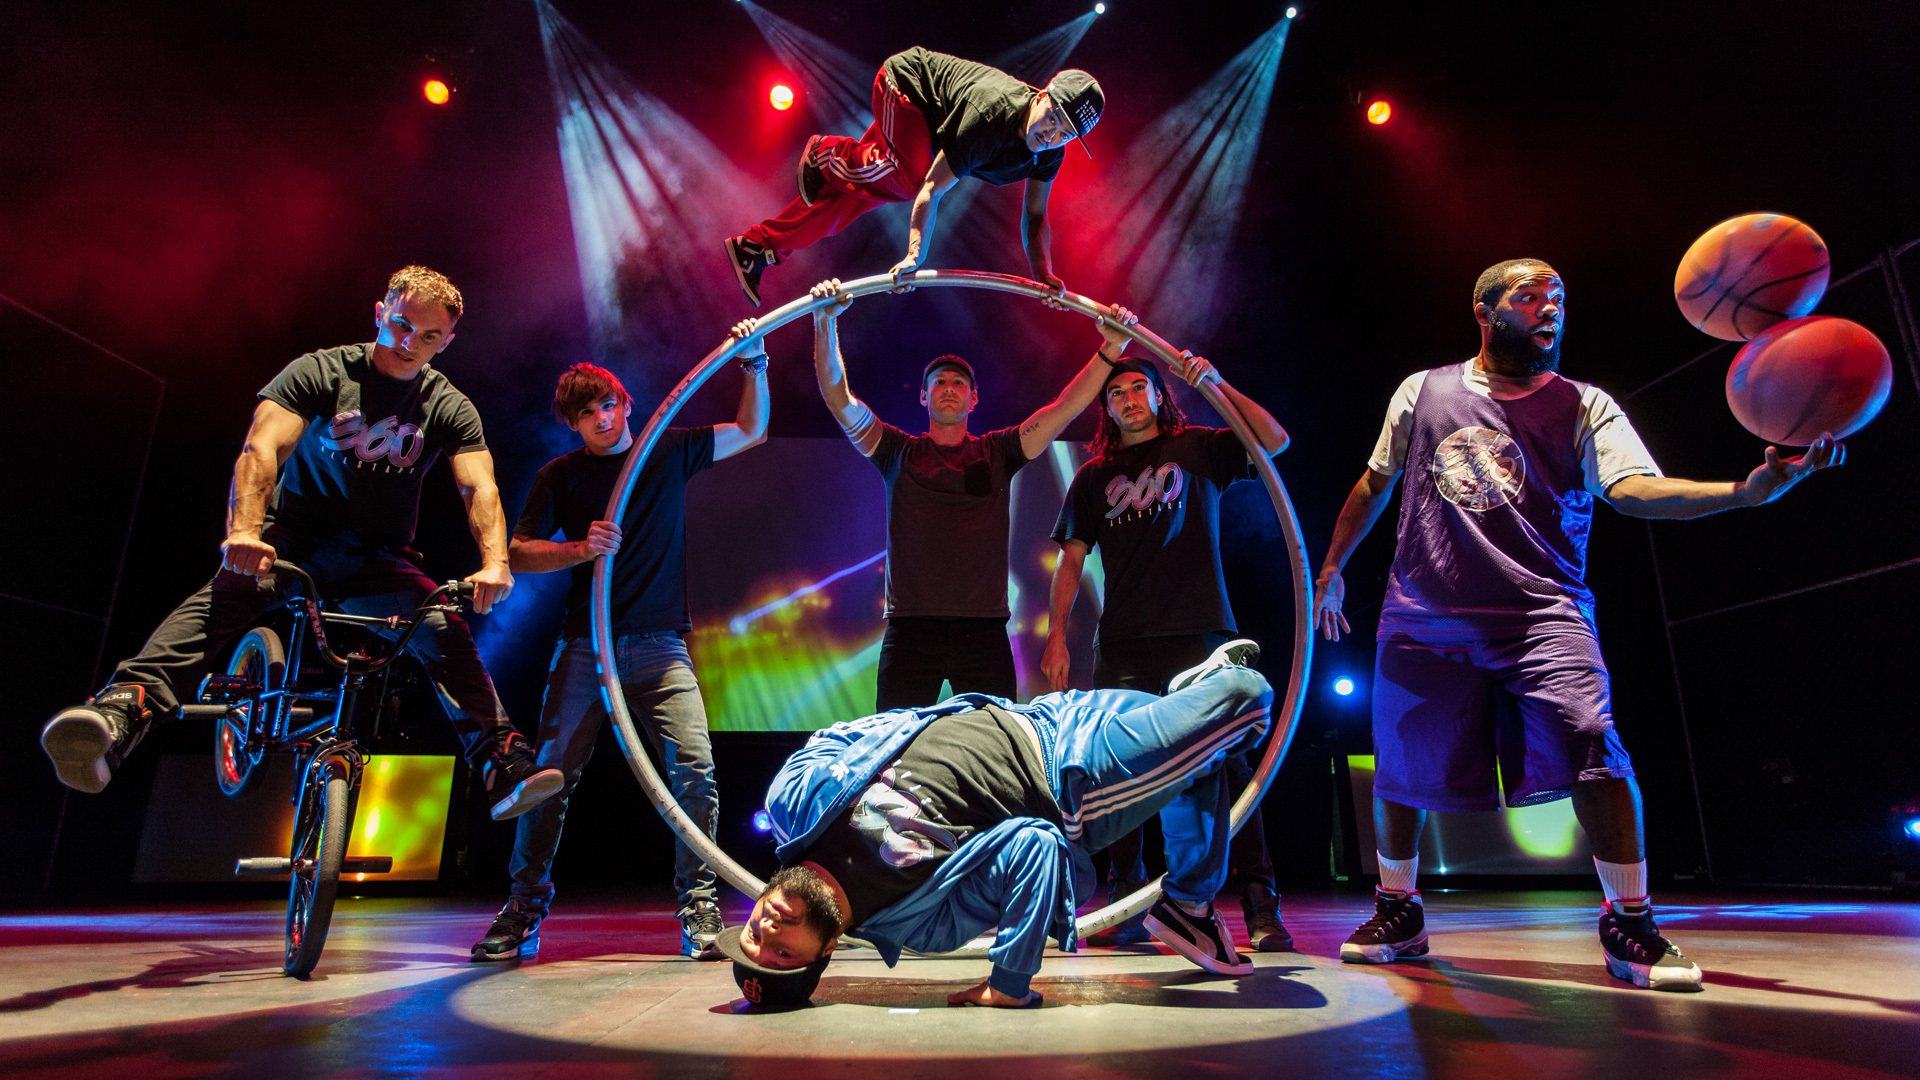 Promotional photo of the cast of 360 ALLSTARS posing on stage: BMX, Cyr wheel, breakdancing, basketball balancing.